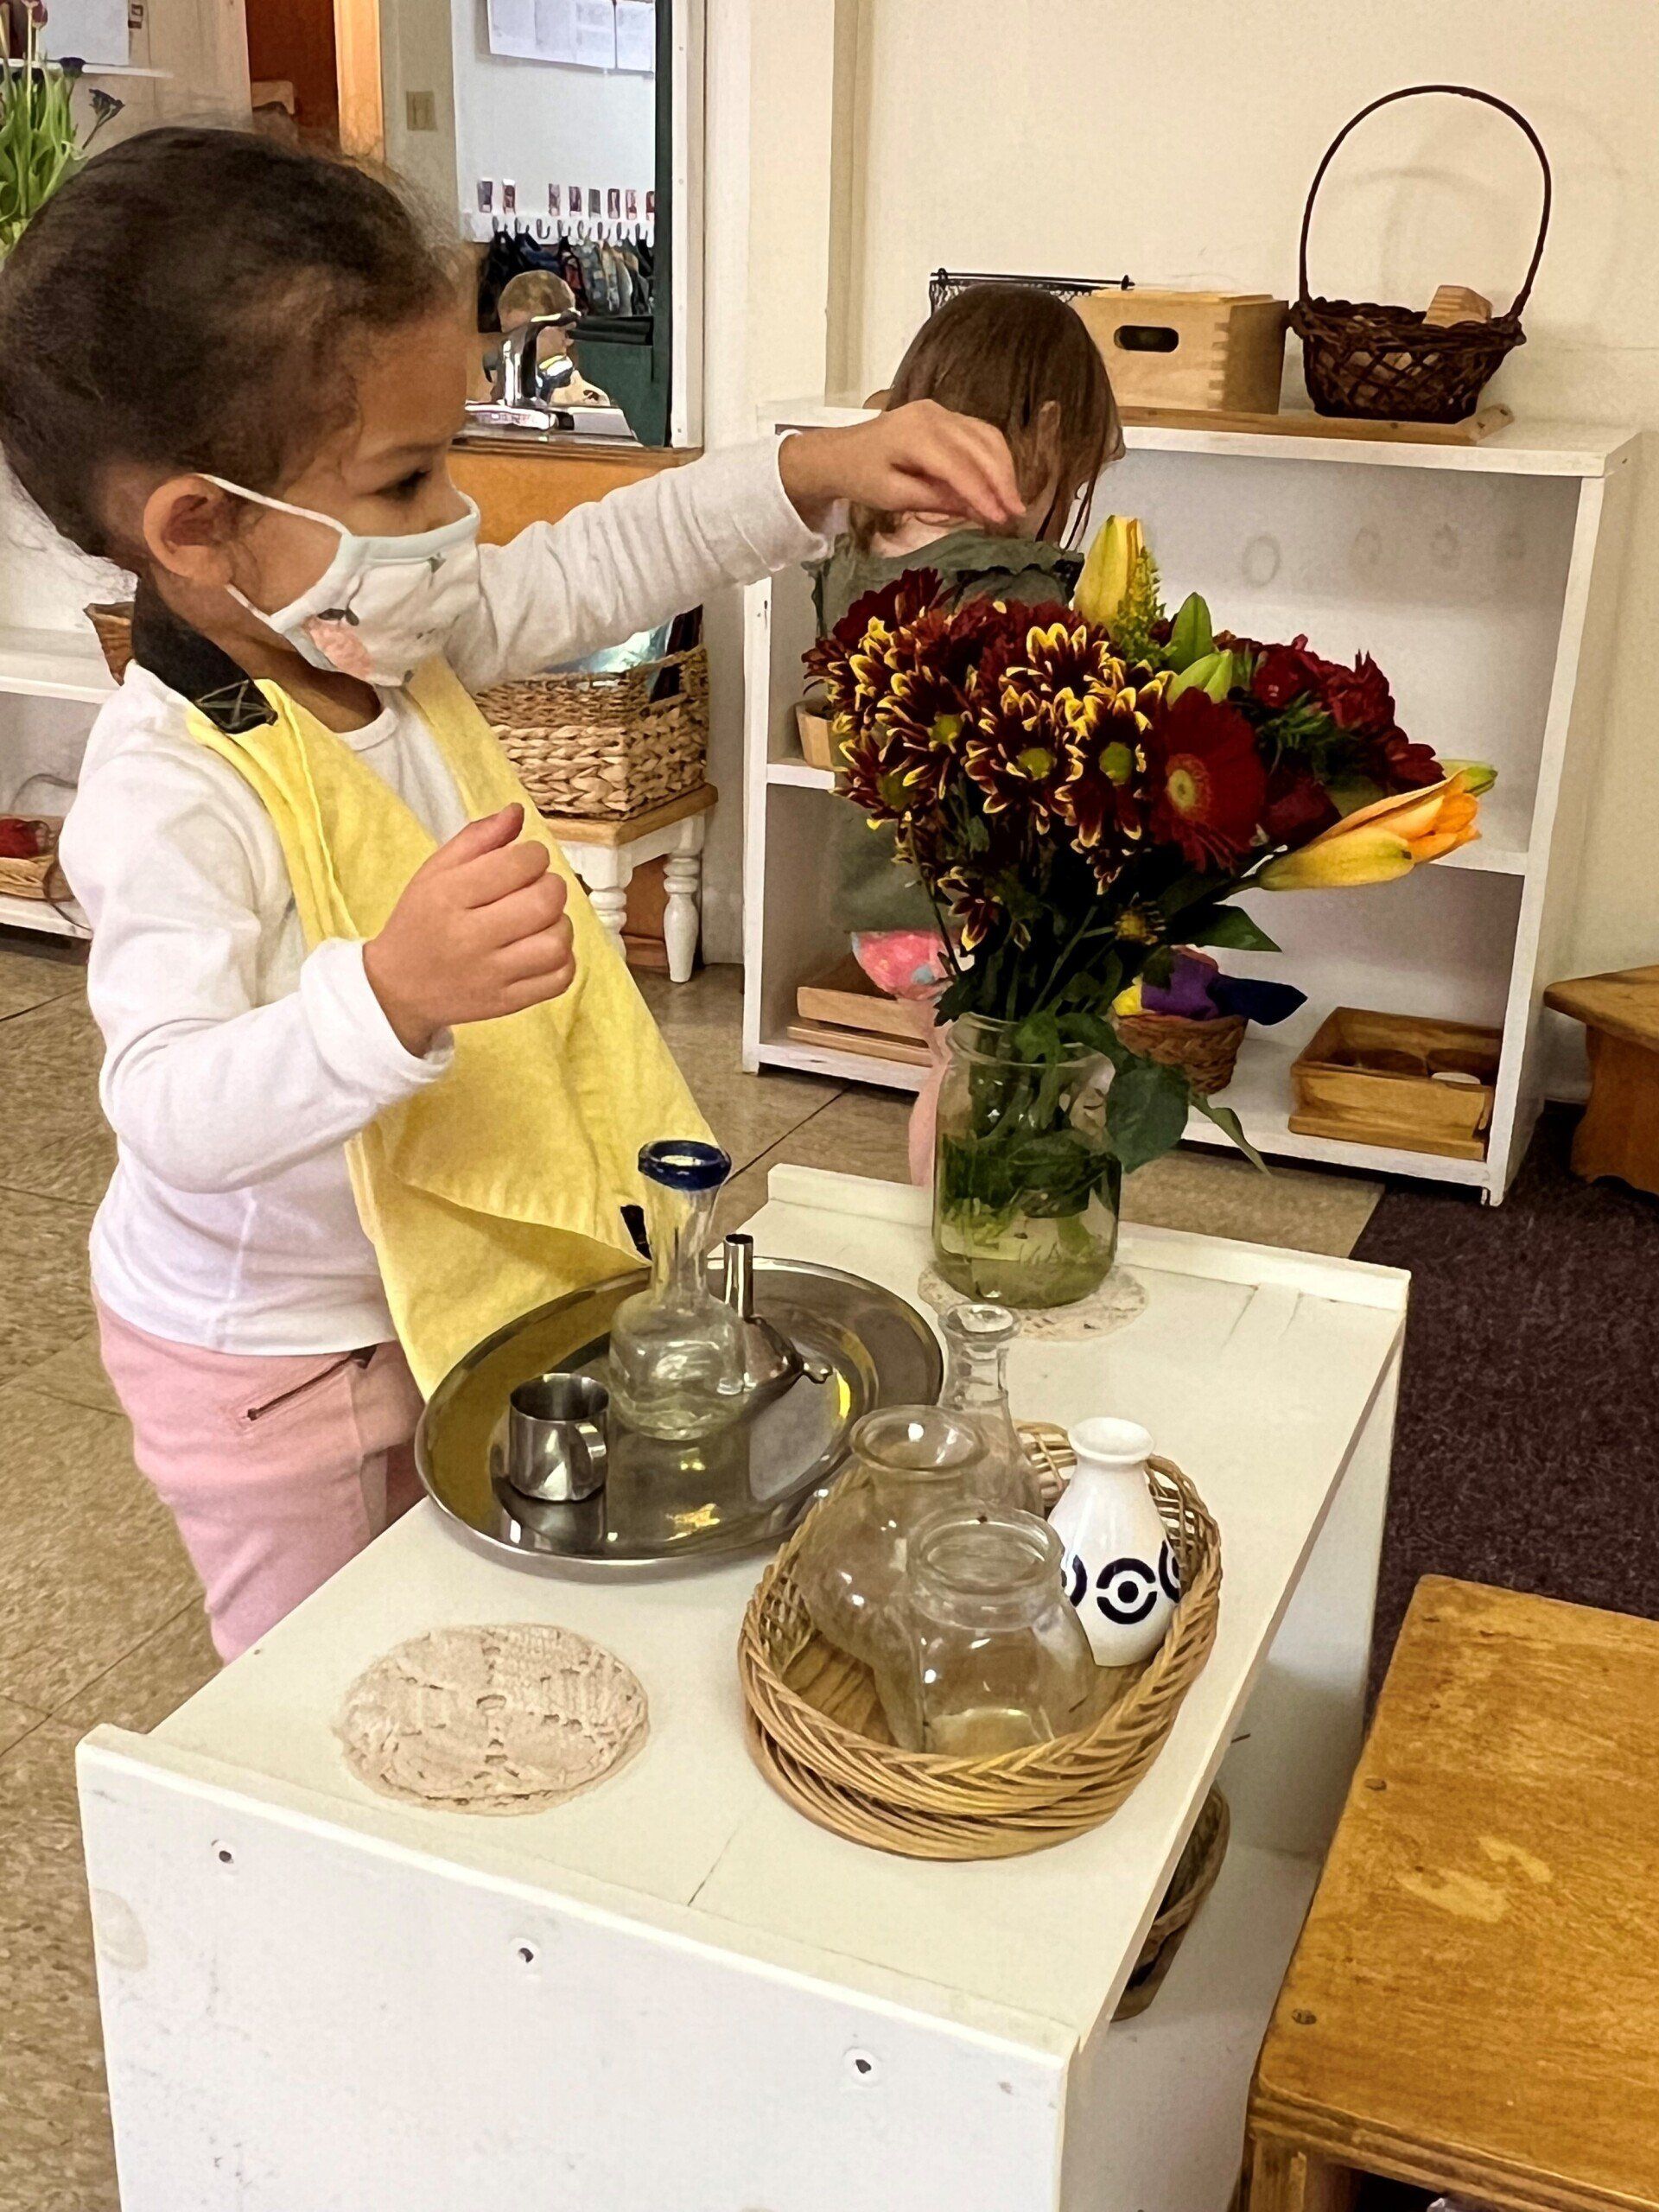 Child working with practical life materials